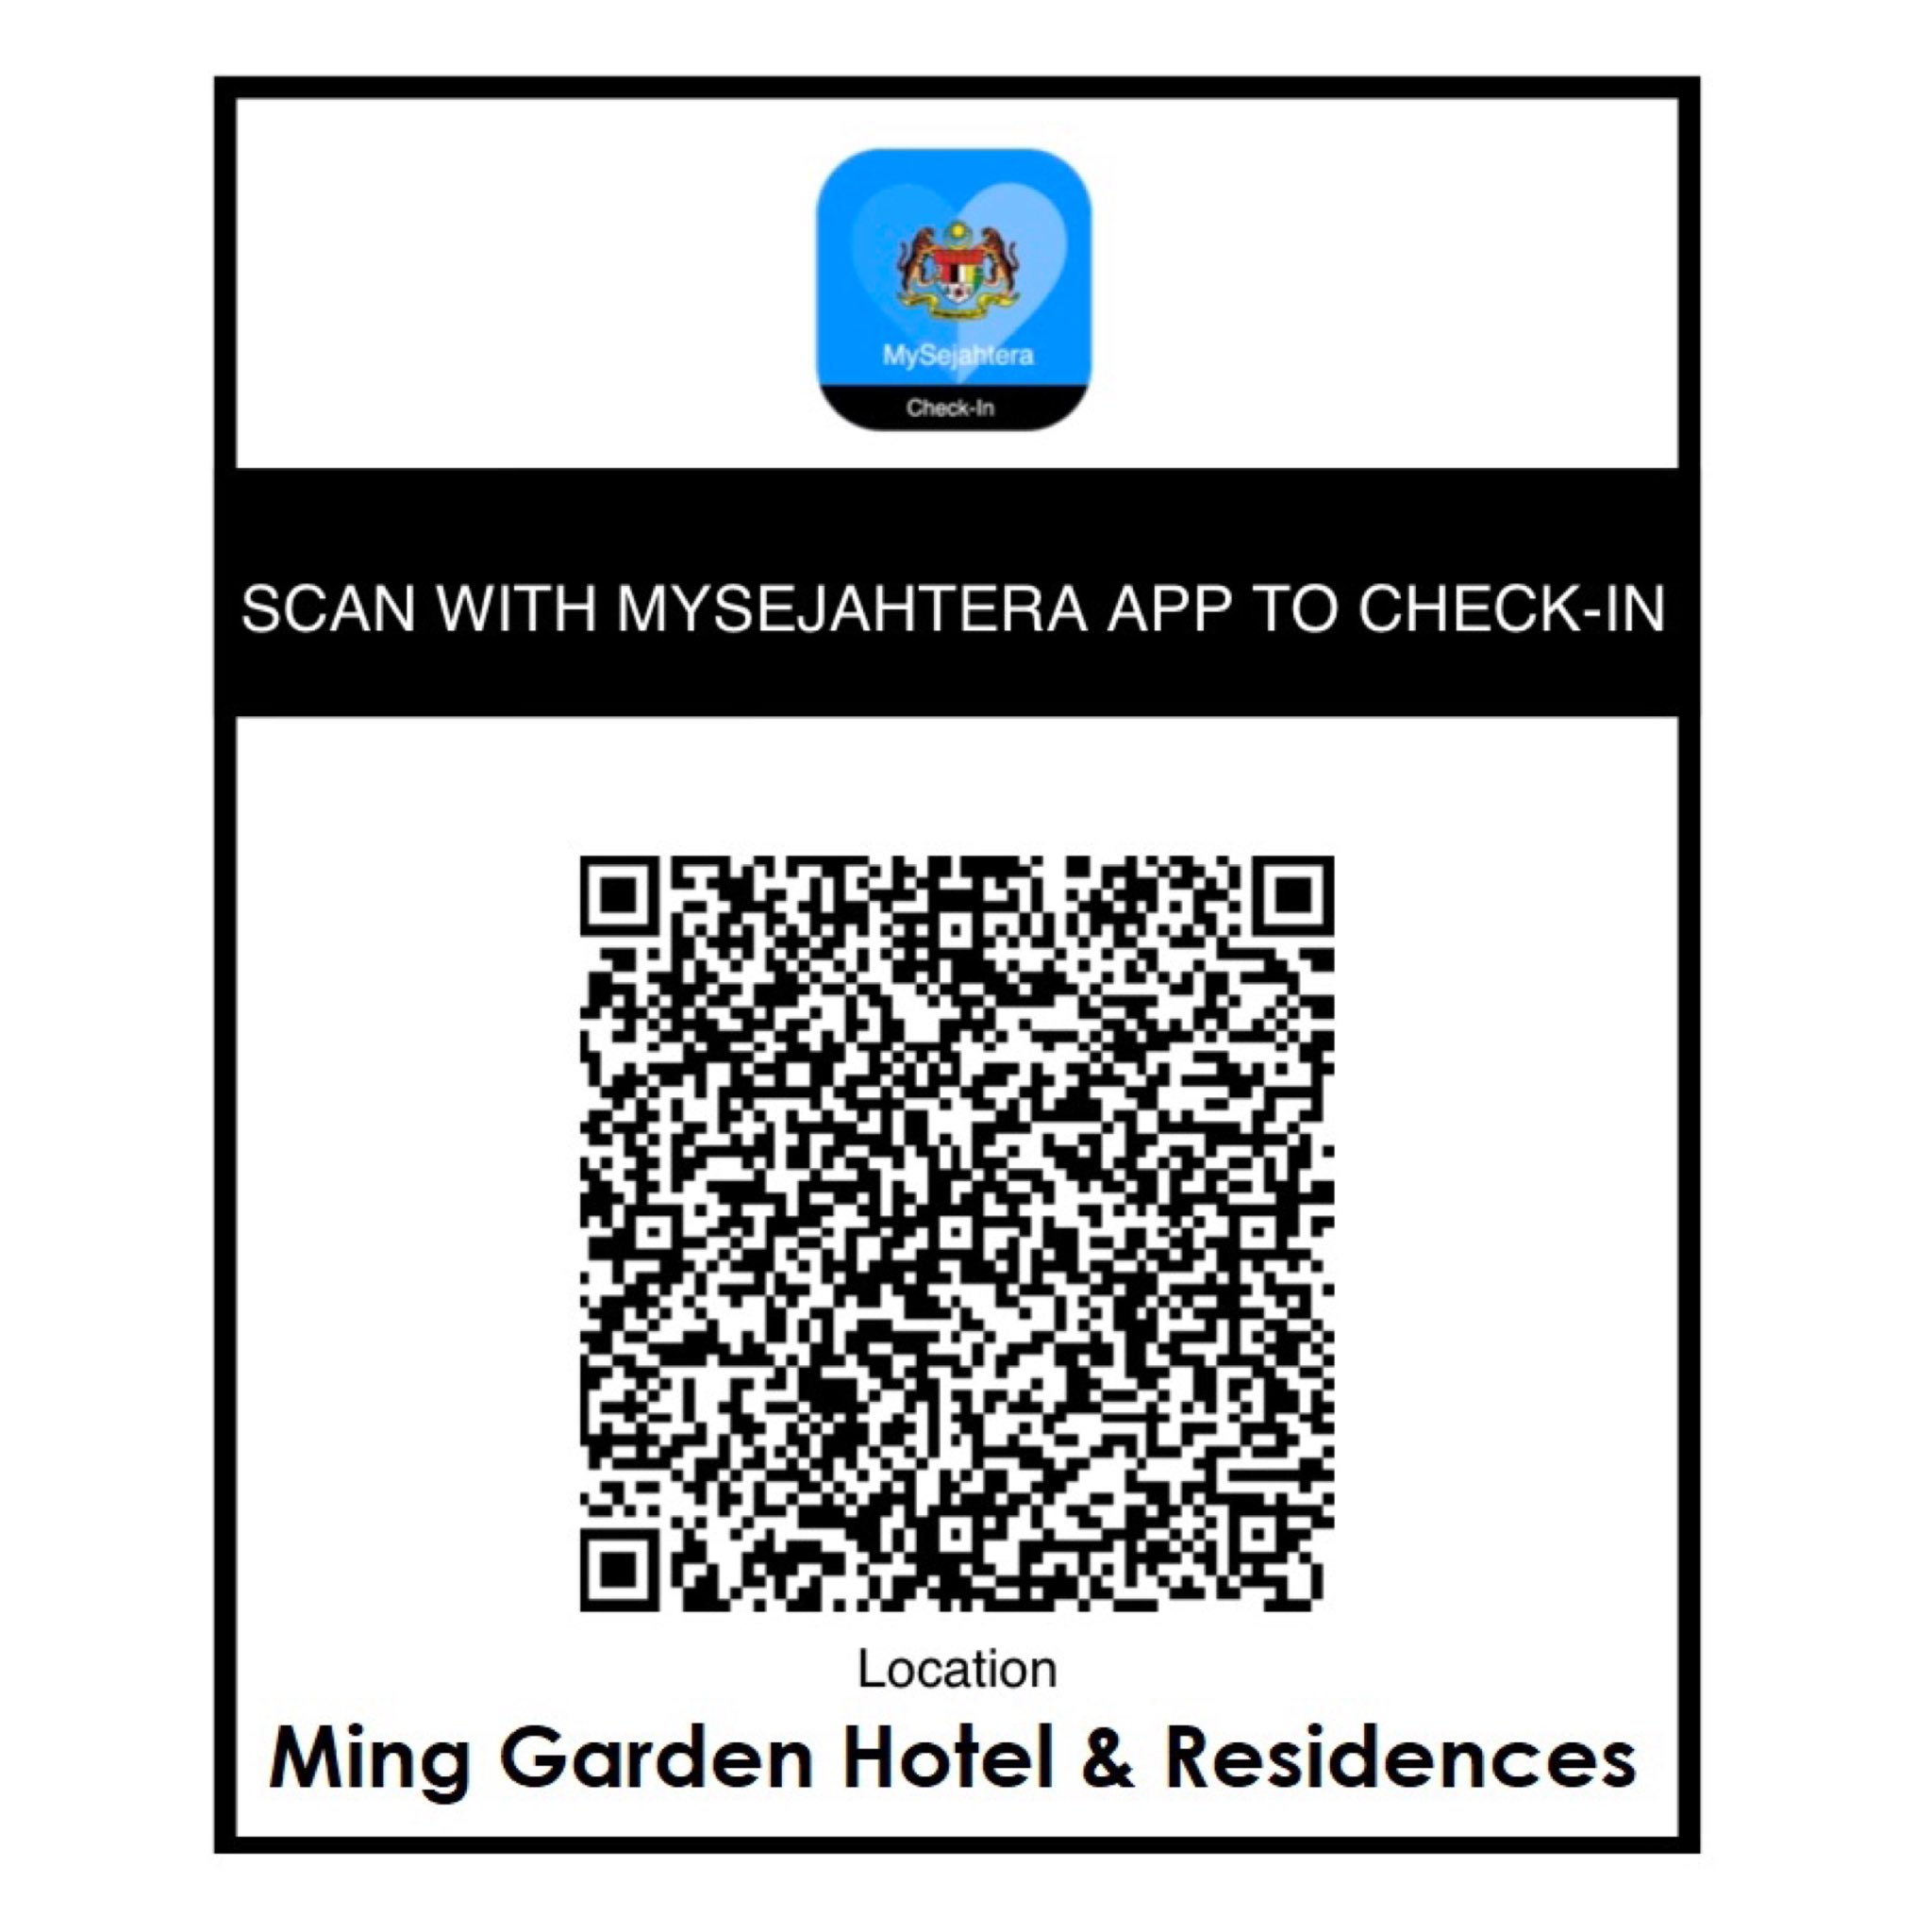 Mysejahtera check in